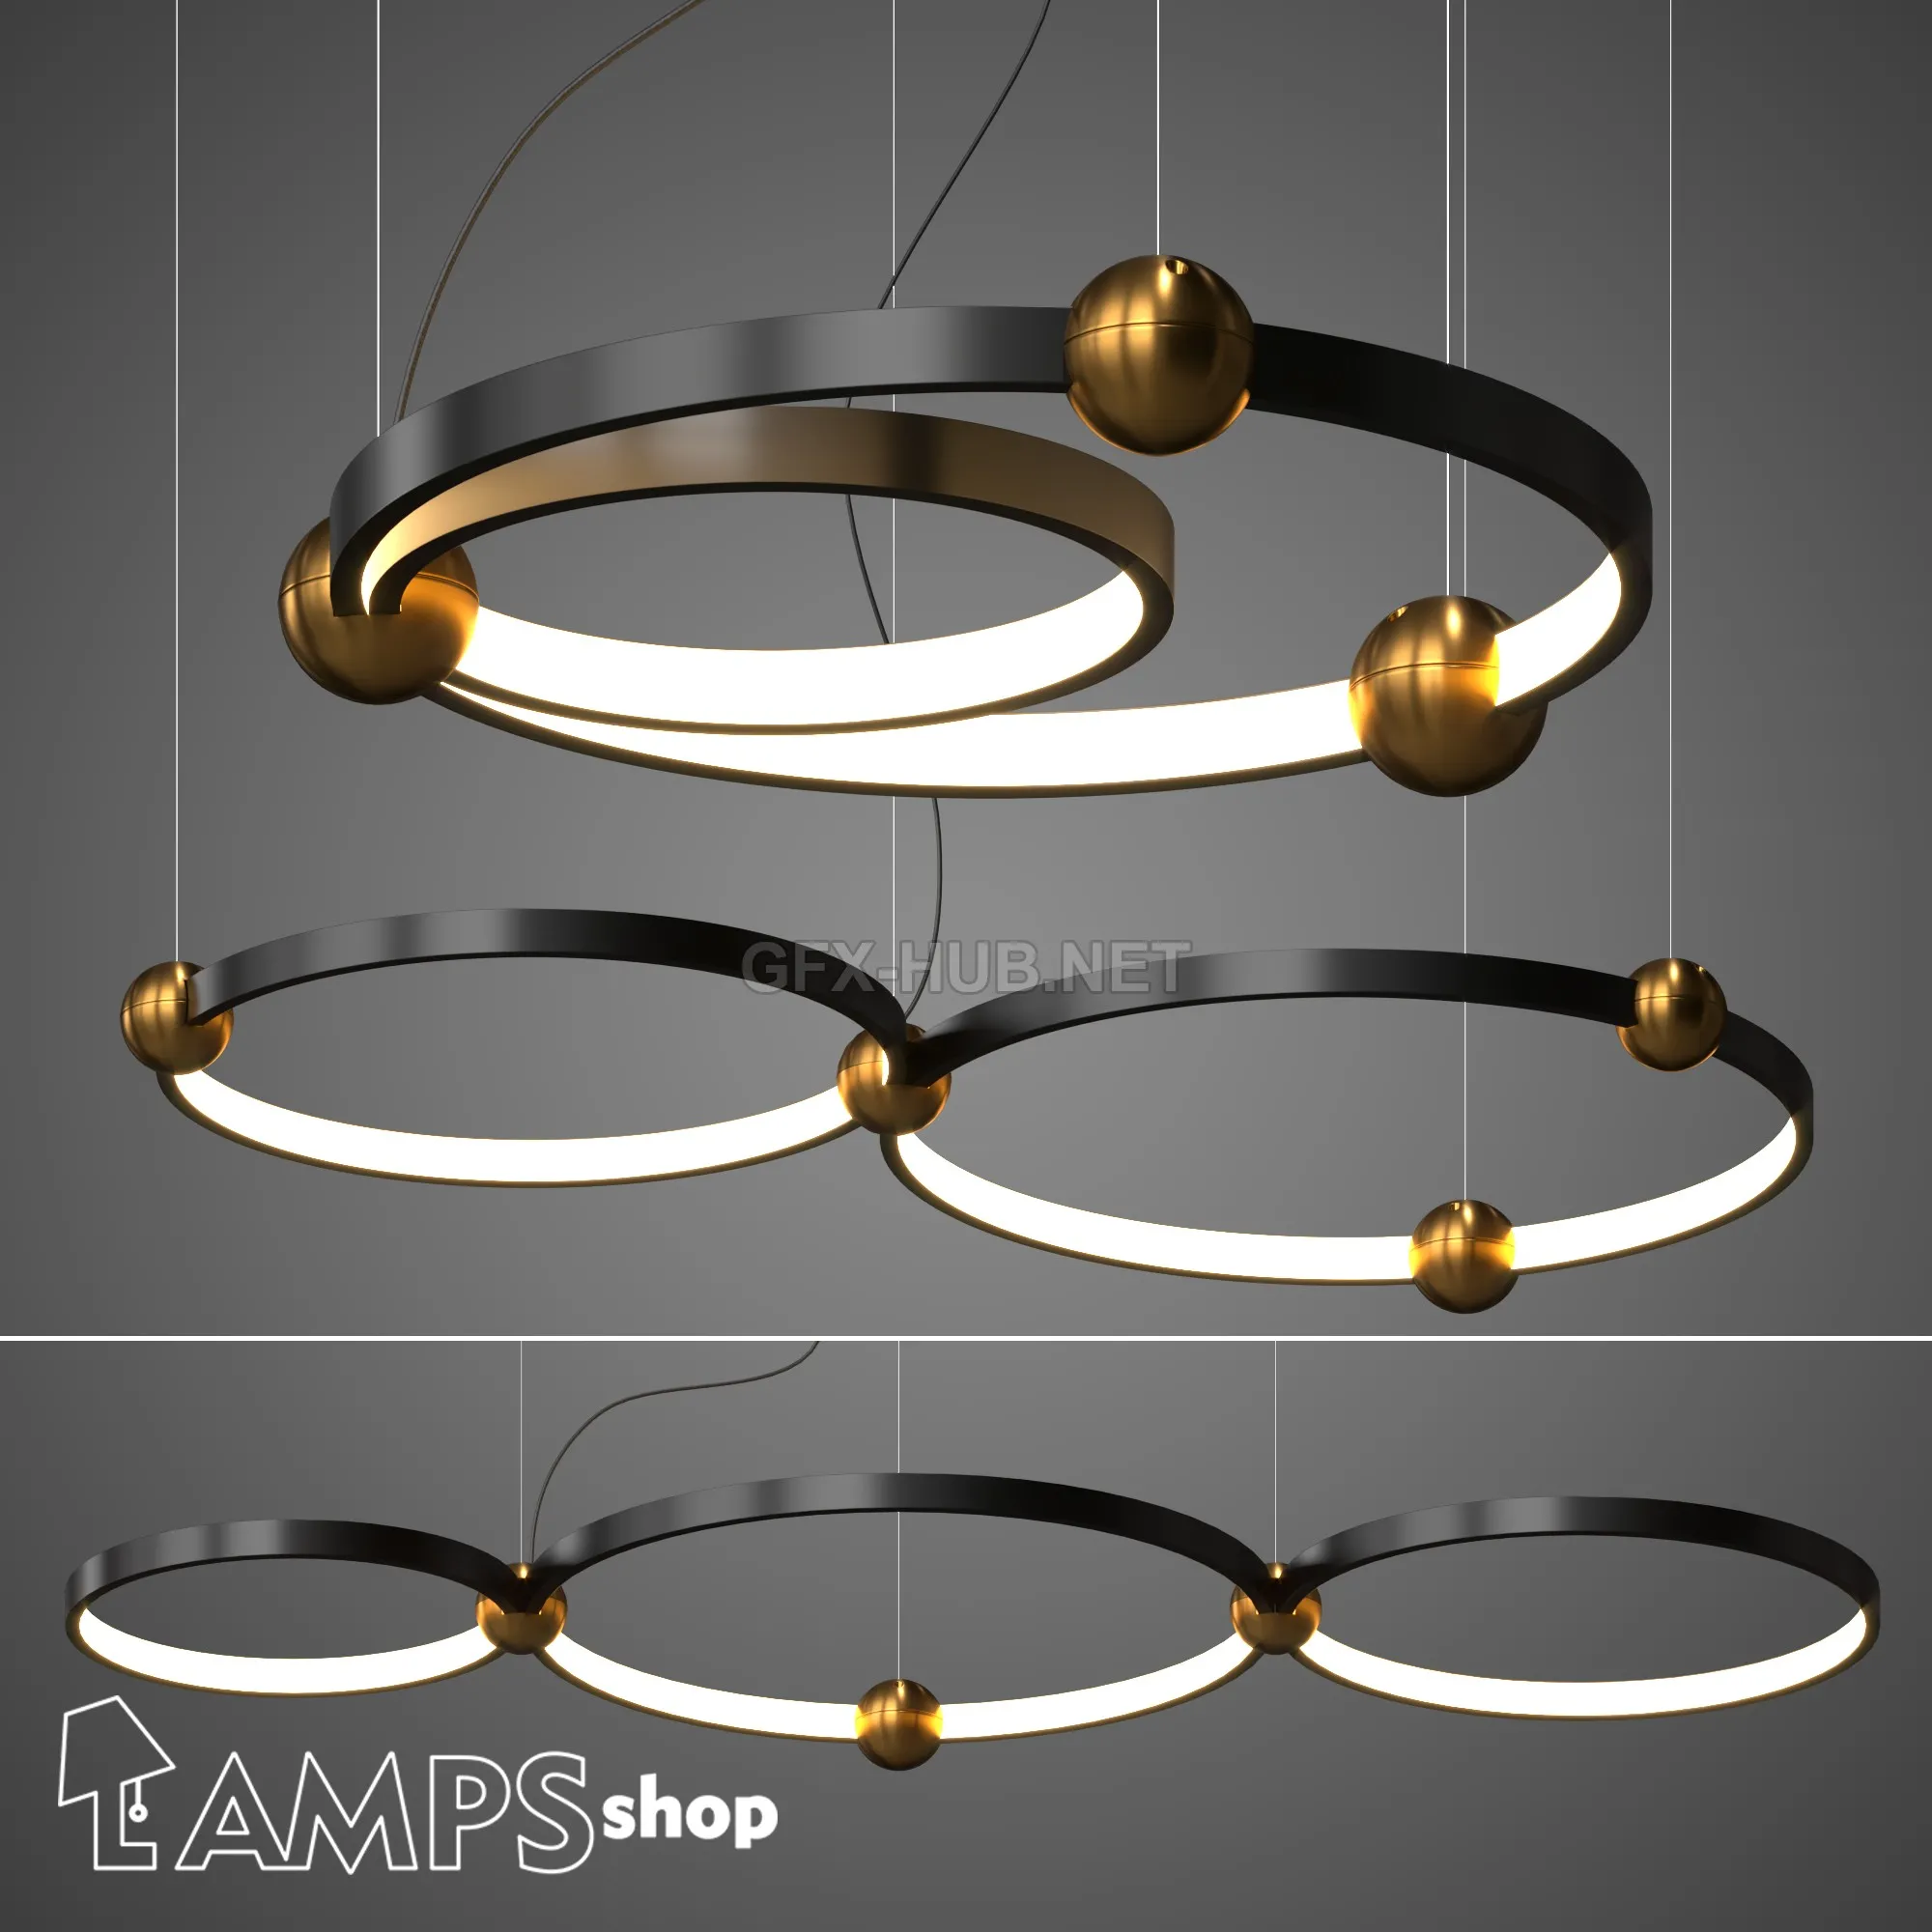 FURNITURE 3D MODELS – LampsShop Chandeliers Mating Rings